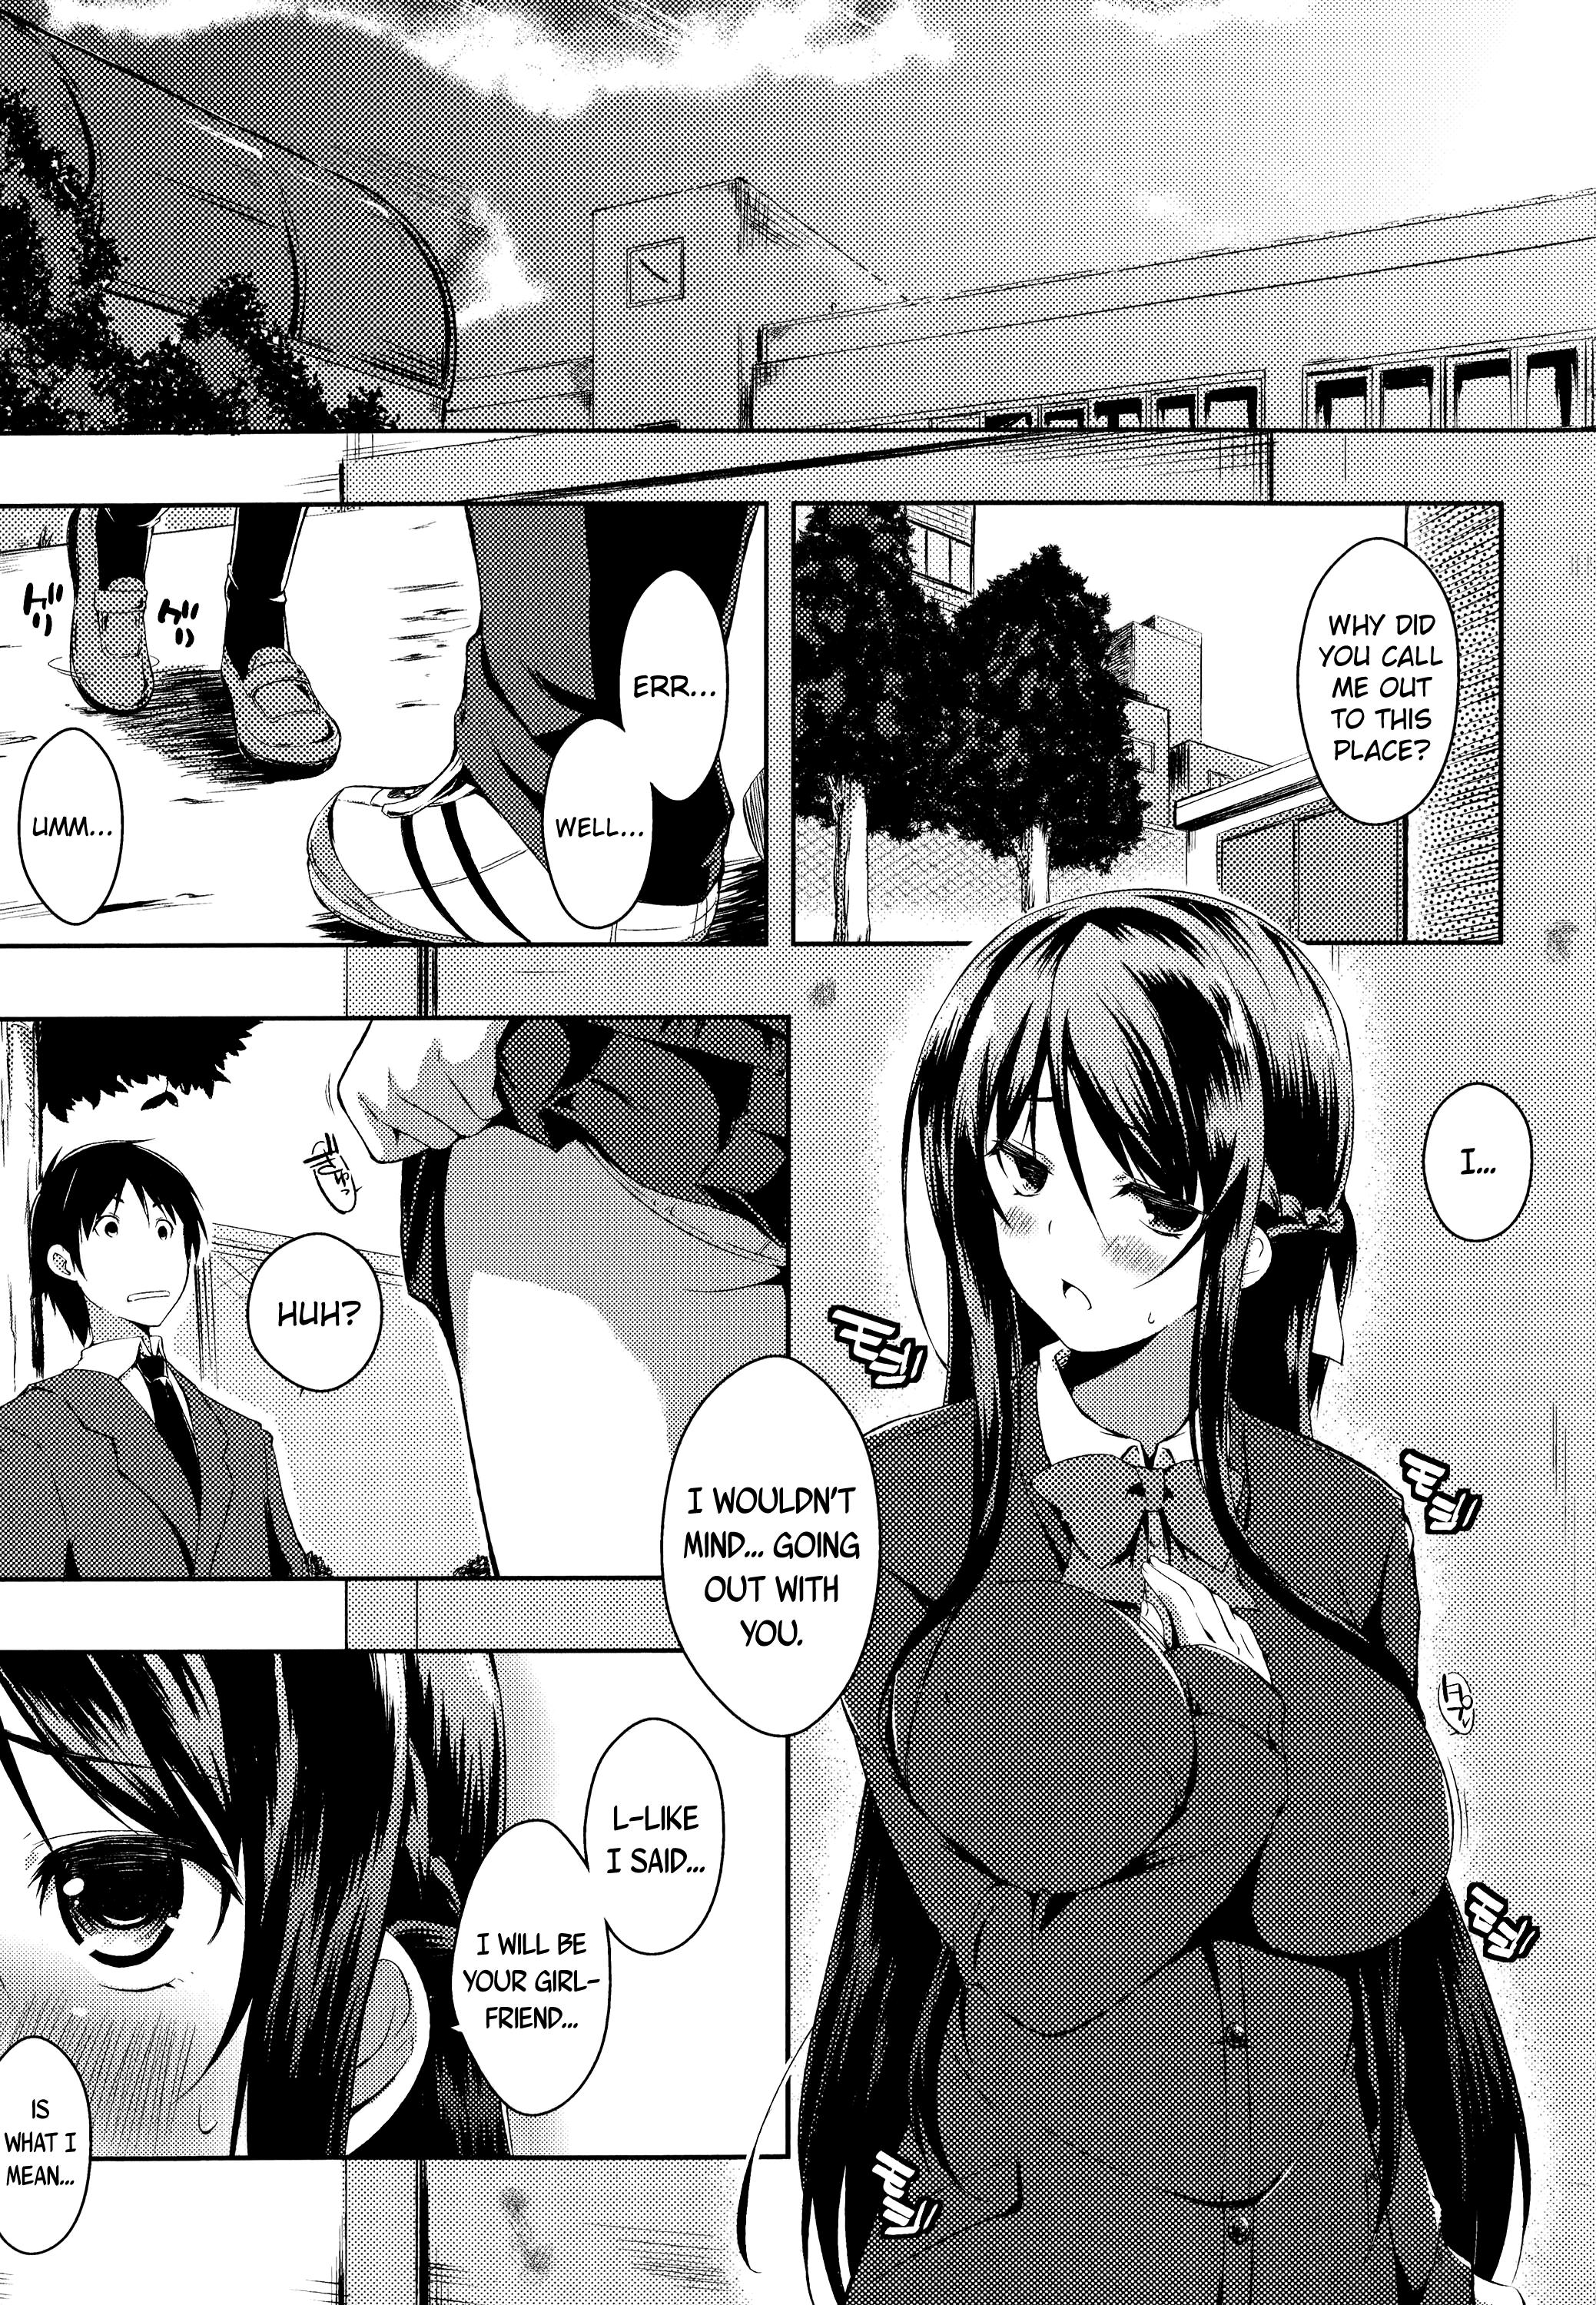 Licking Sono Namae de Yobanaide Ch. 1-3 | Don't call me that name Soapy - Page 5